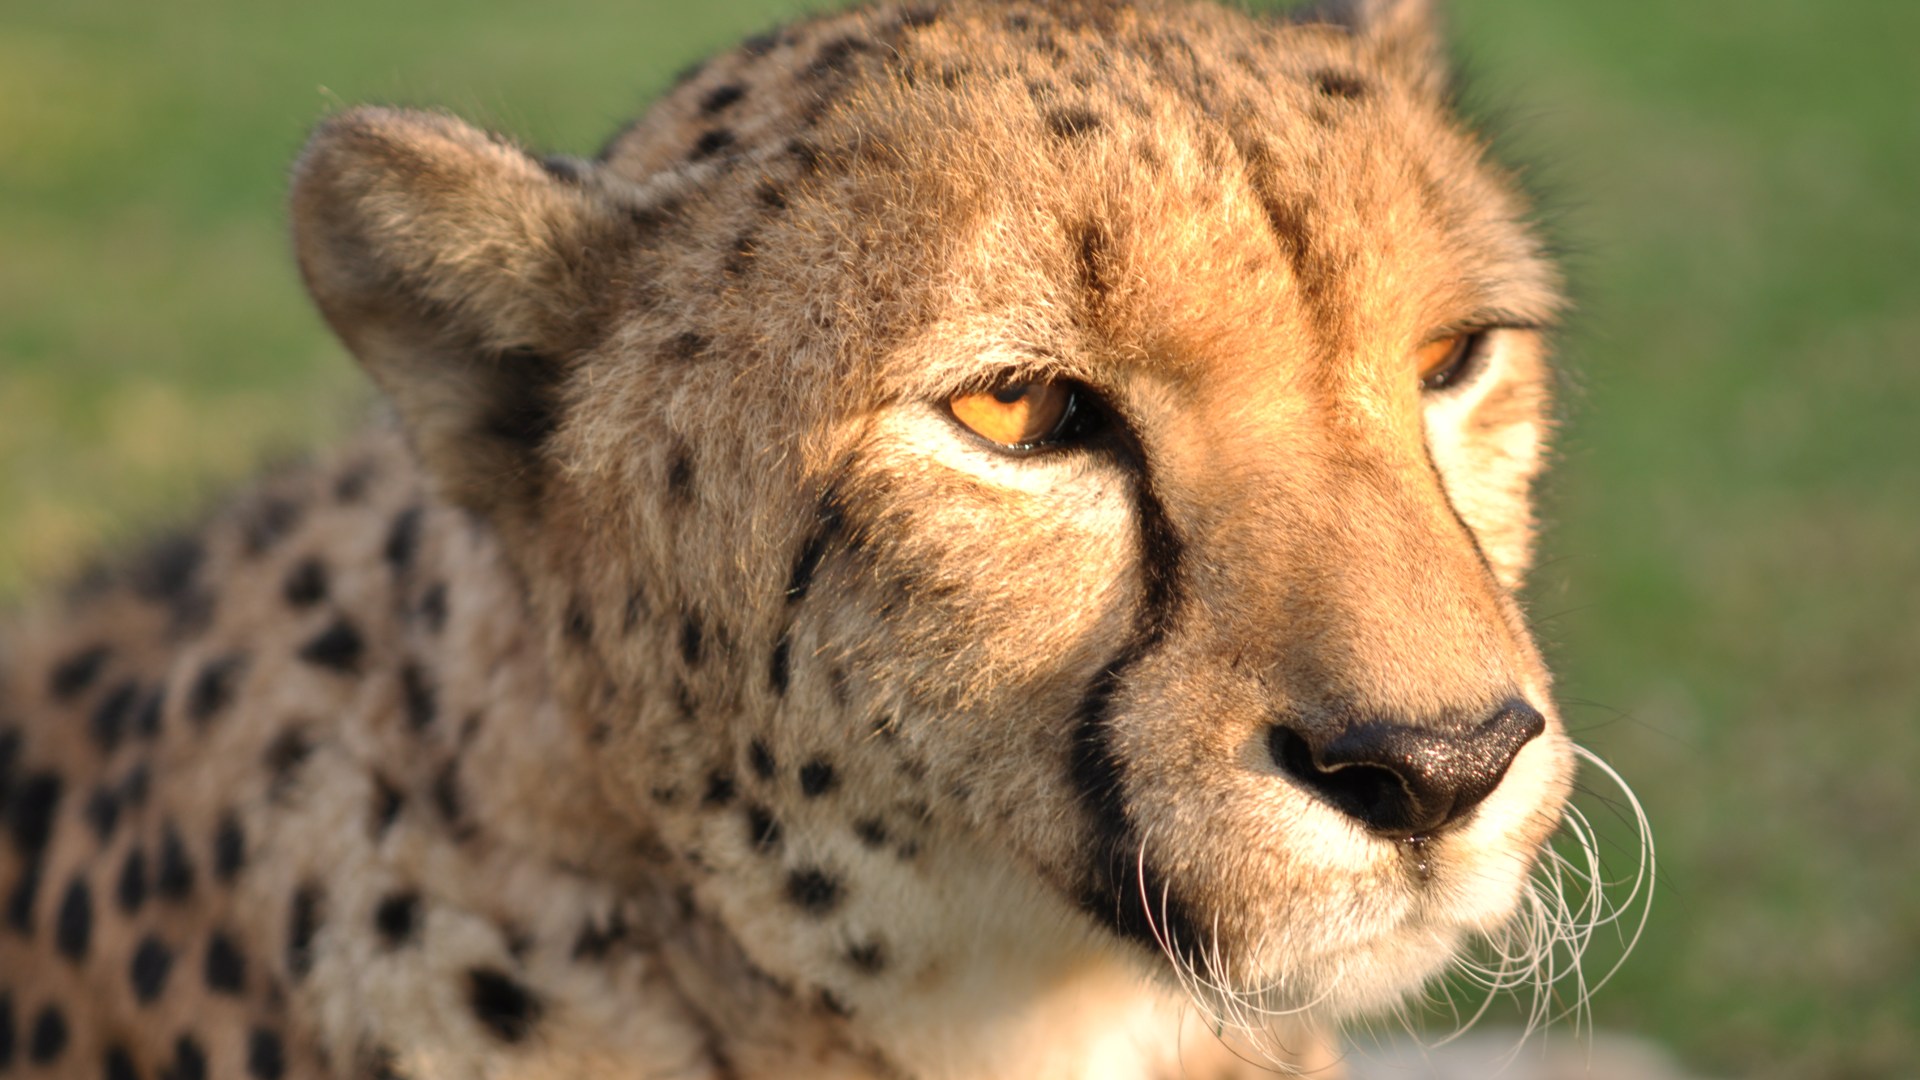 South Africa is sending cheetahs to India and Mozambique | News | Al Jazeera